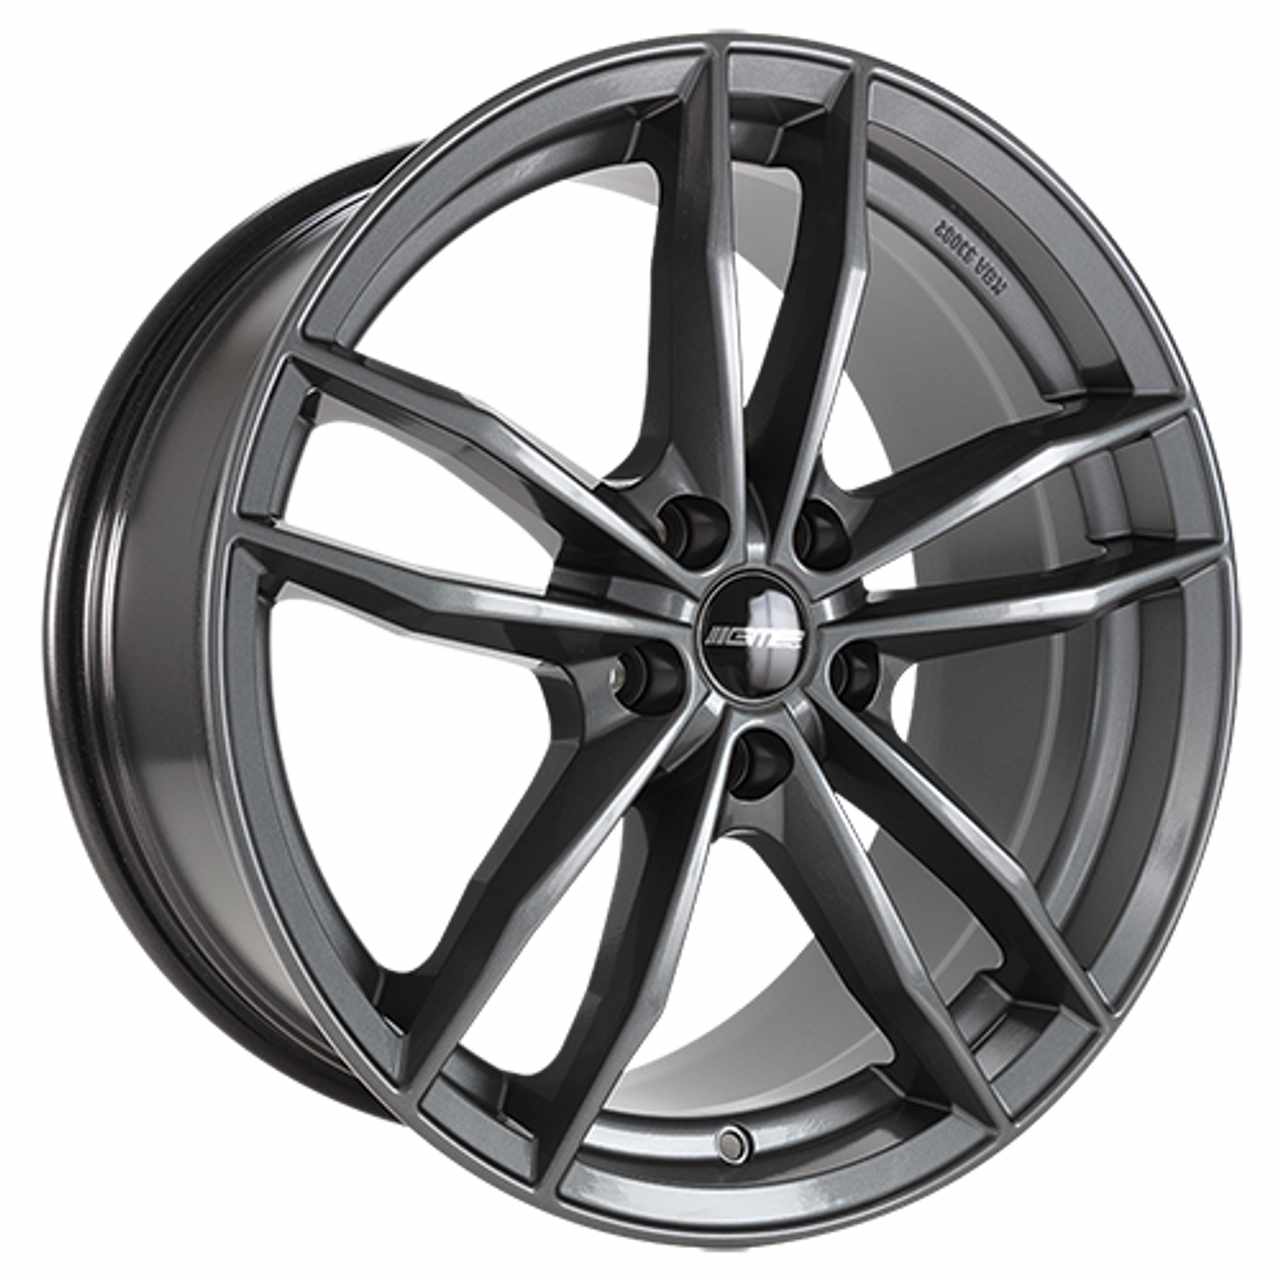 GMP SWAN anthracite glossy 8.0Jx18 5x112 ET30